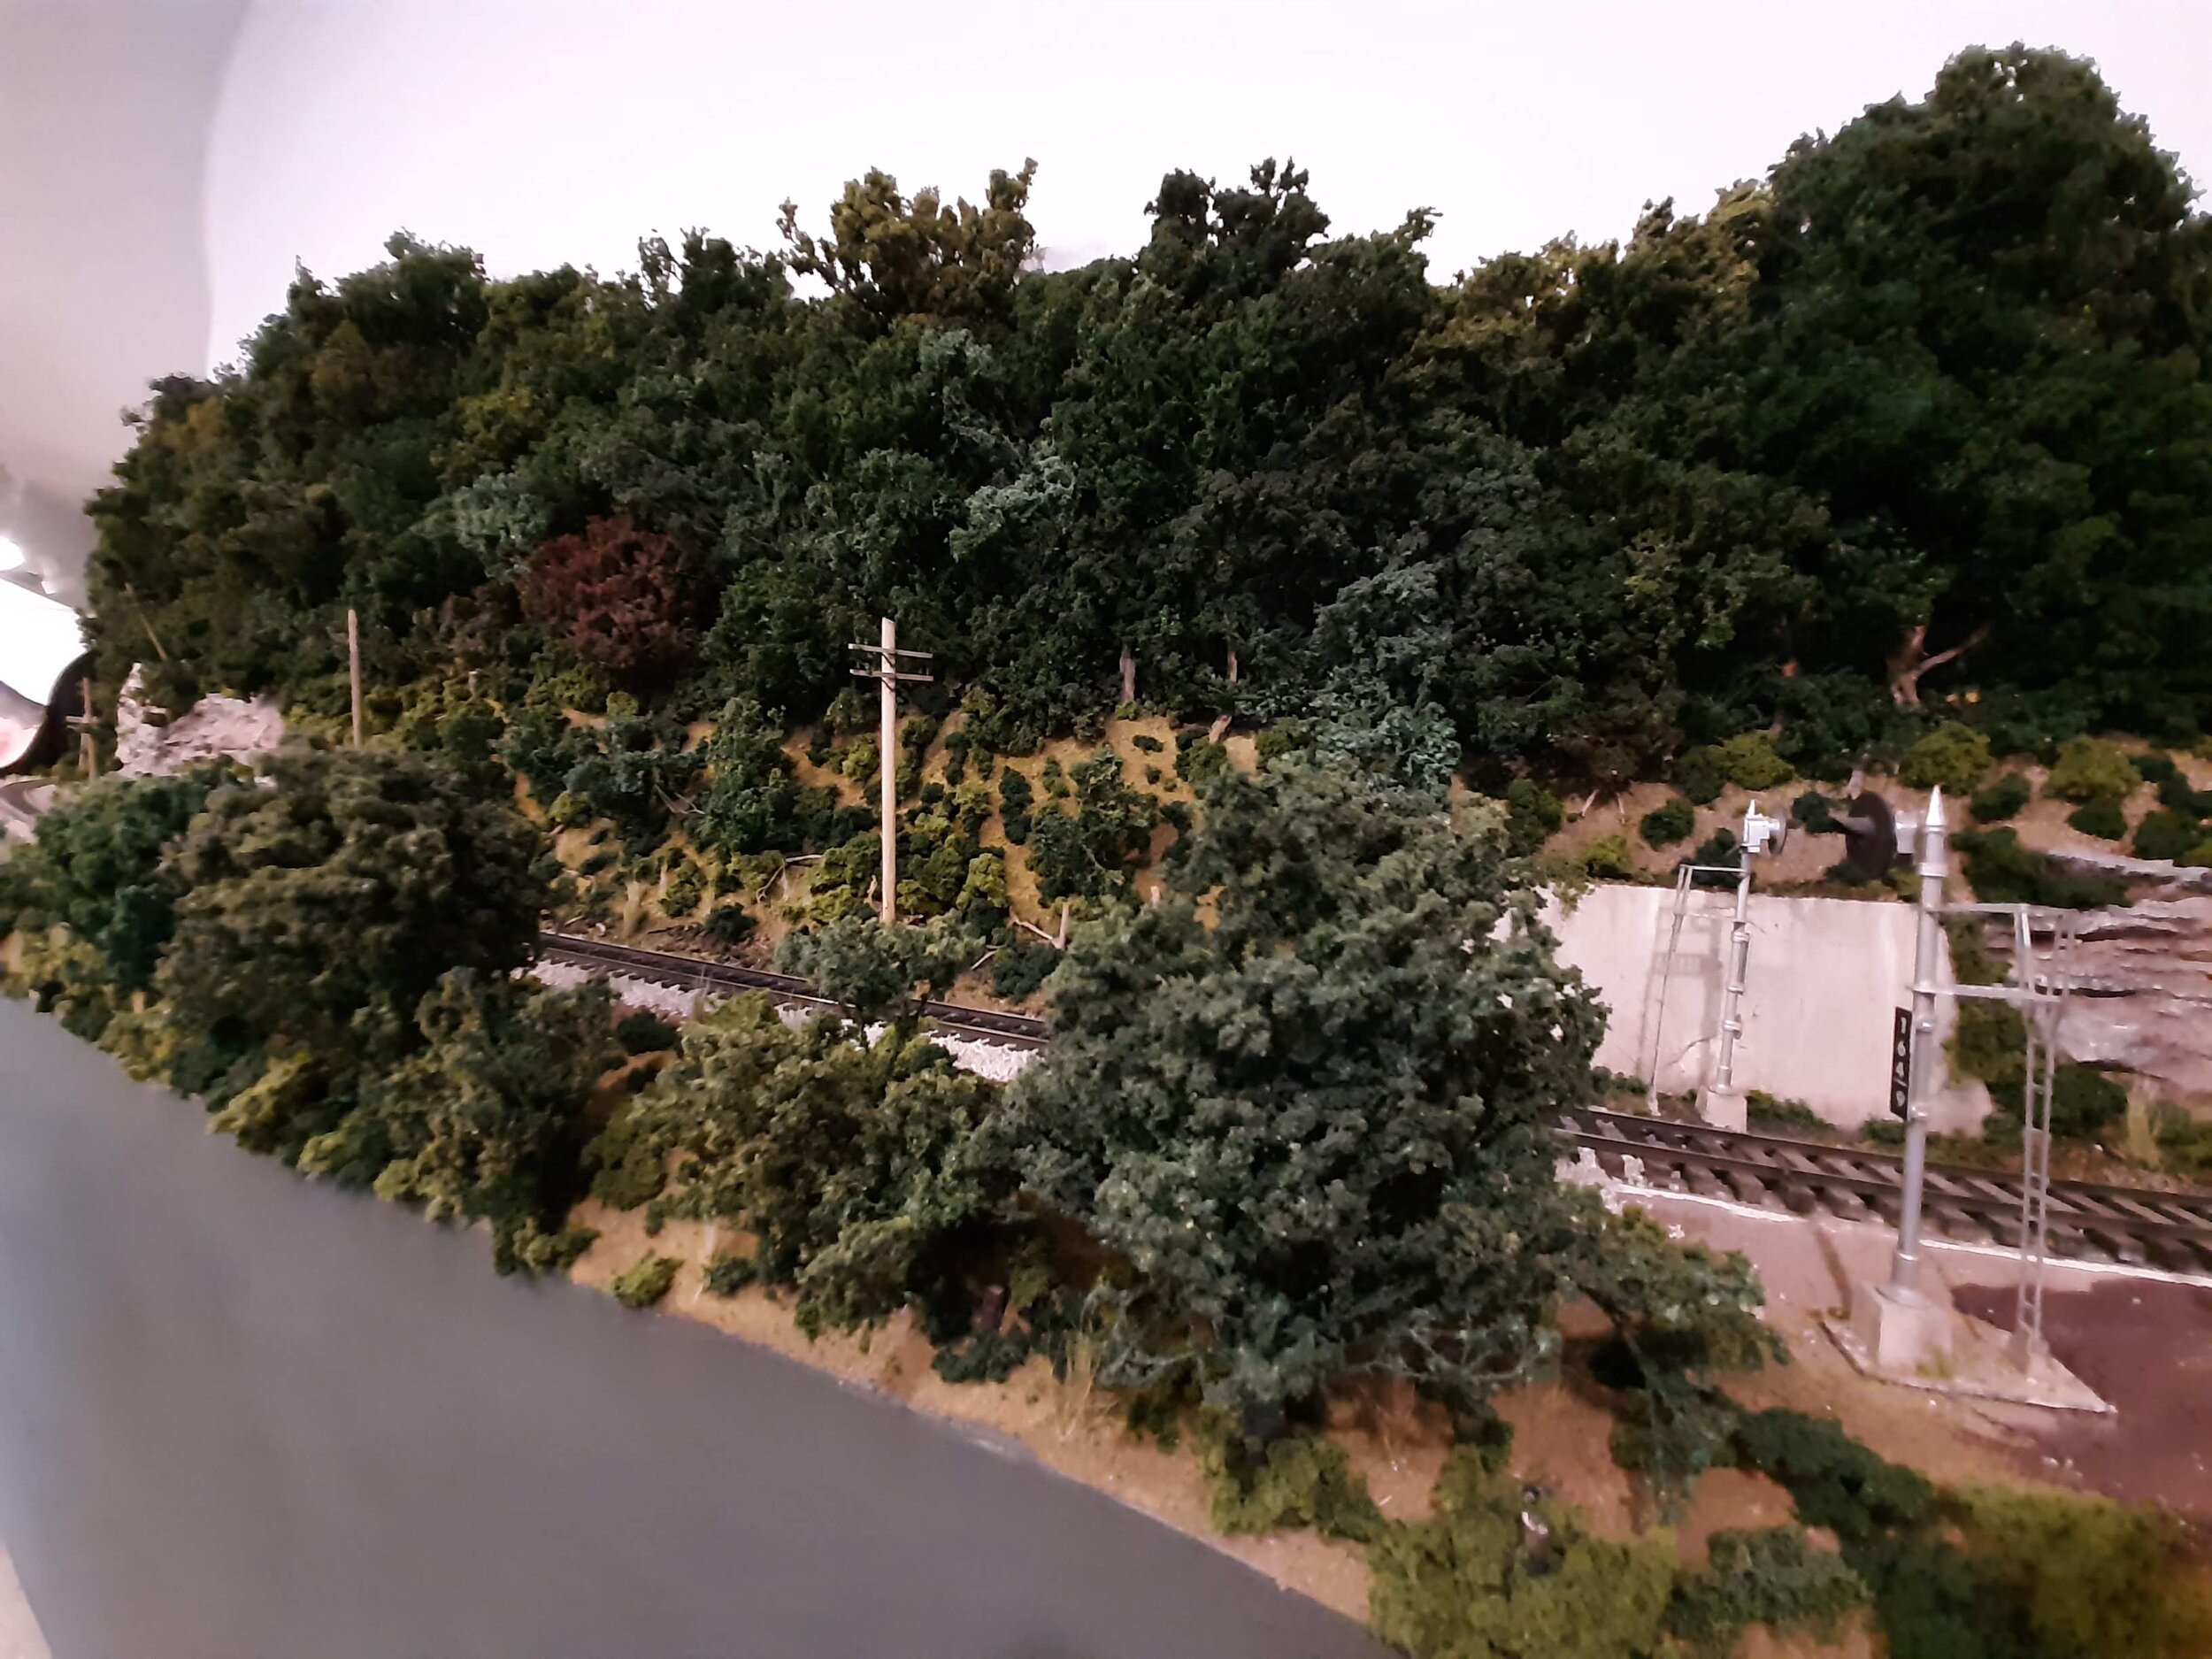  Even though the front edge of the scene is intentionally lowered (see Scenery- Landforms), where width allows, an occasional foreground tree allows trains to play peek-a-boo. Fun for the crew and great for photos.   